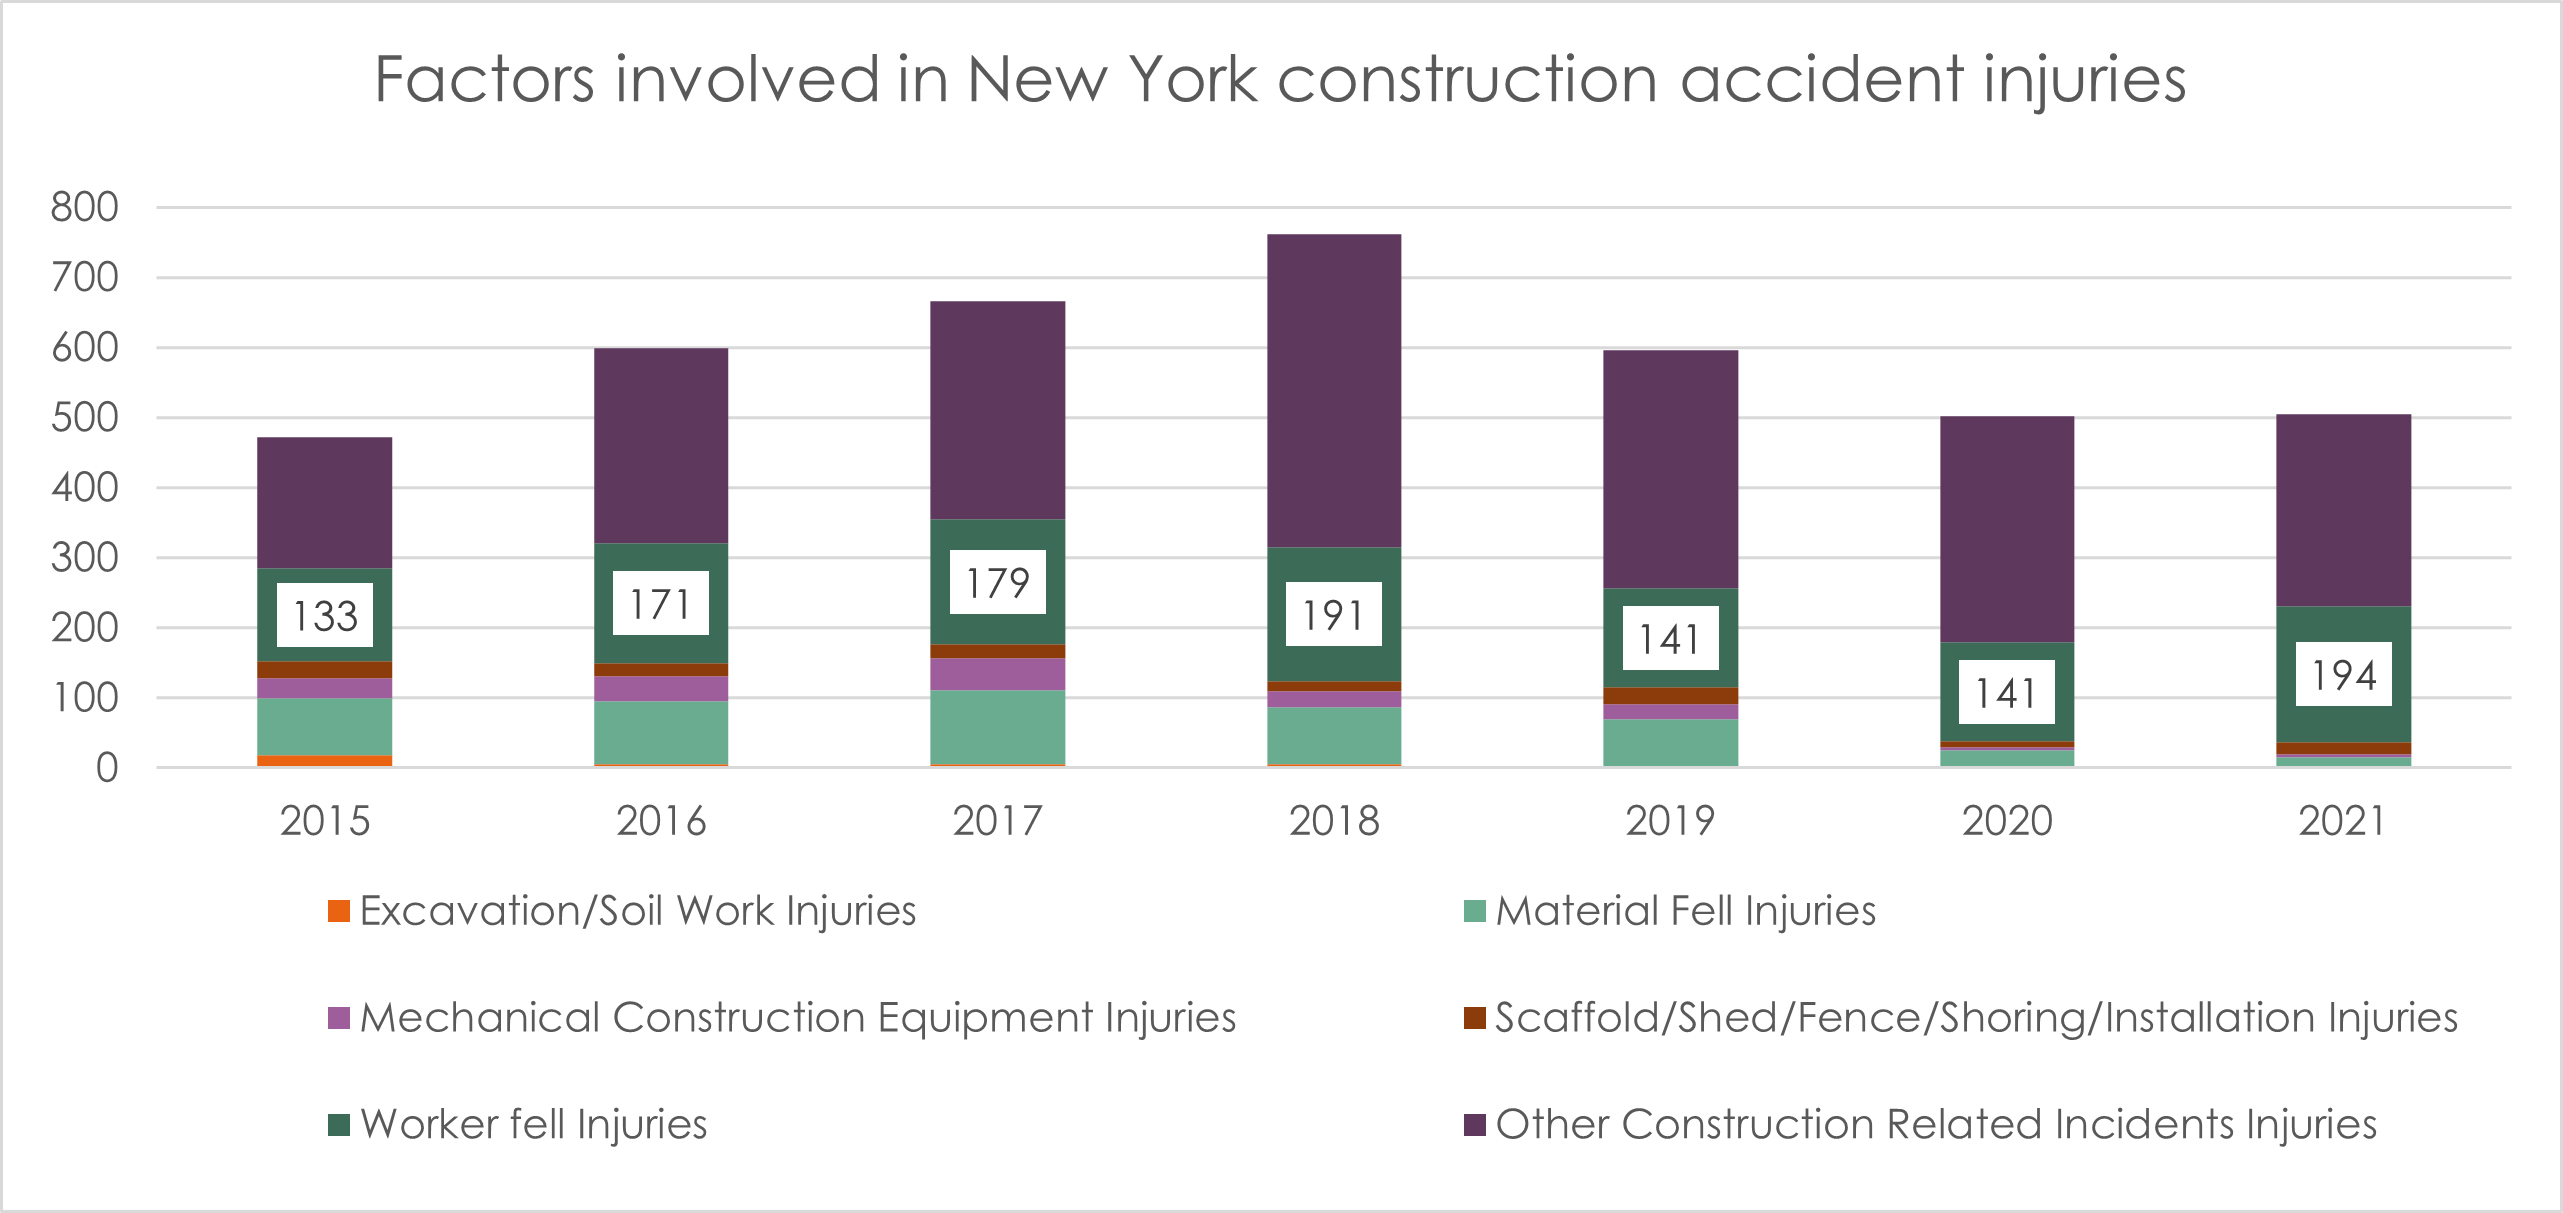 Factors involved in construction accident in juries NYC 2021